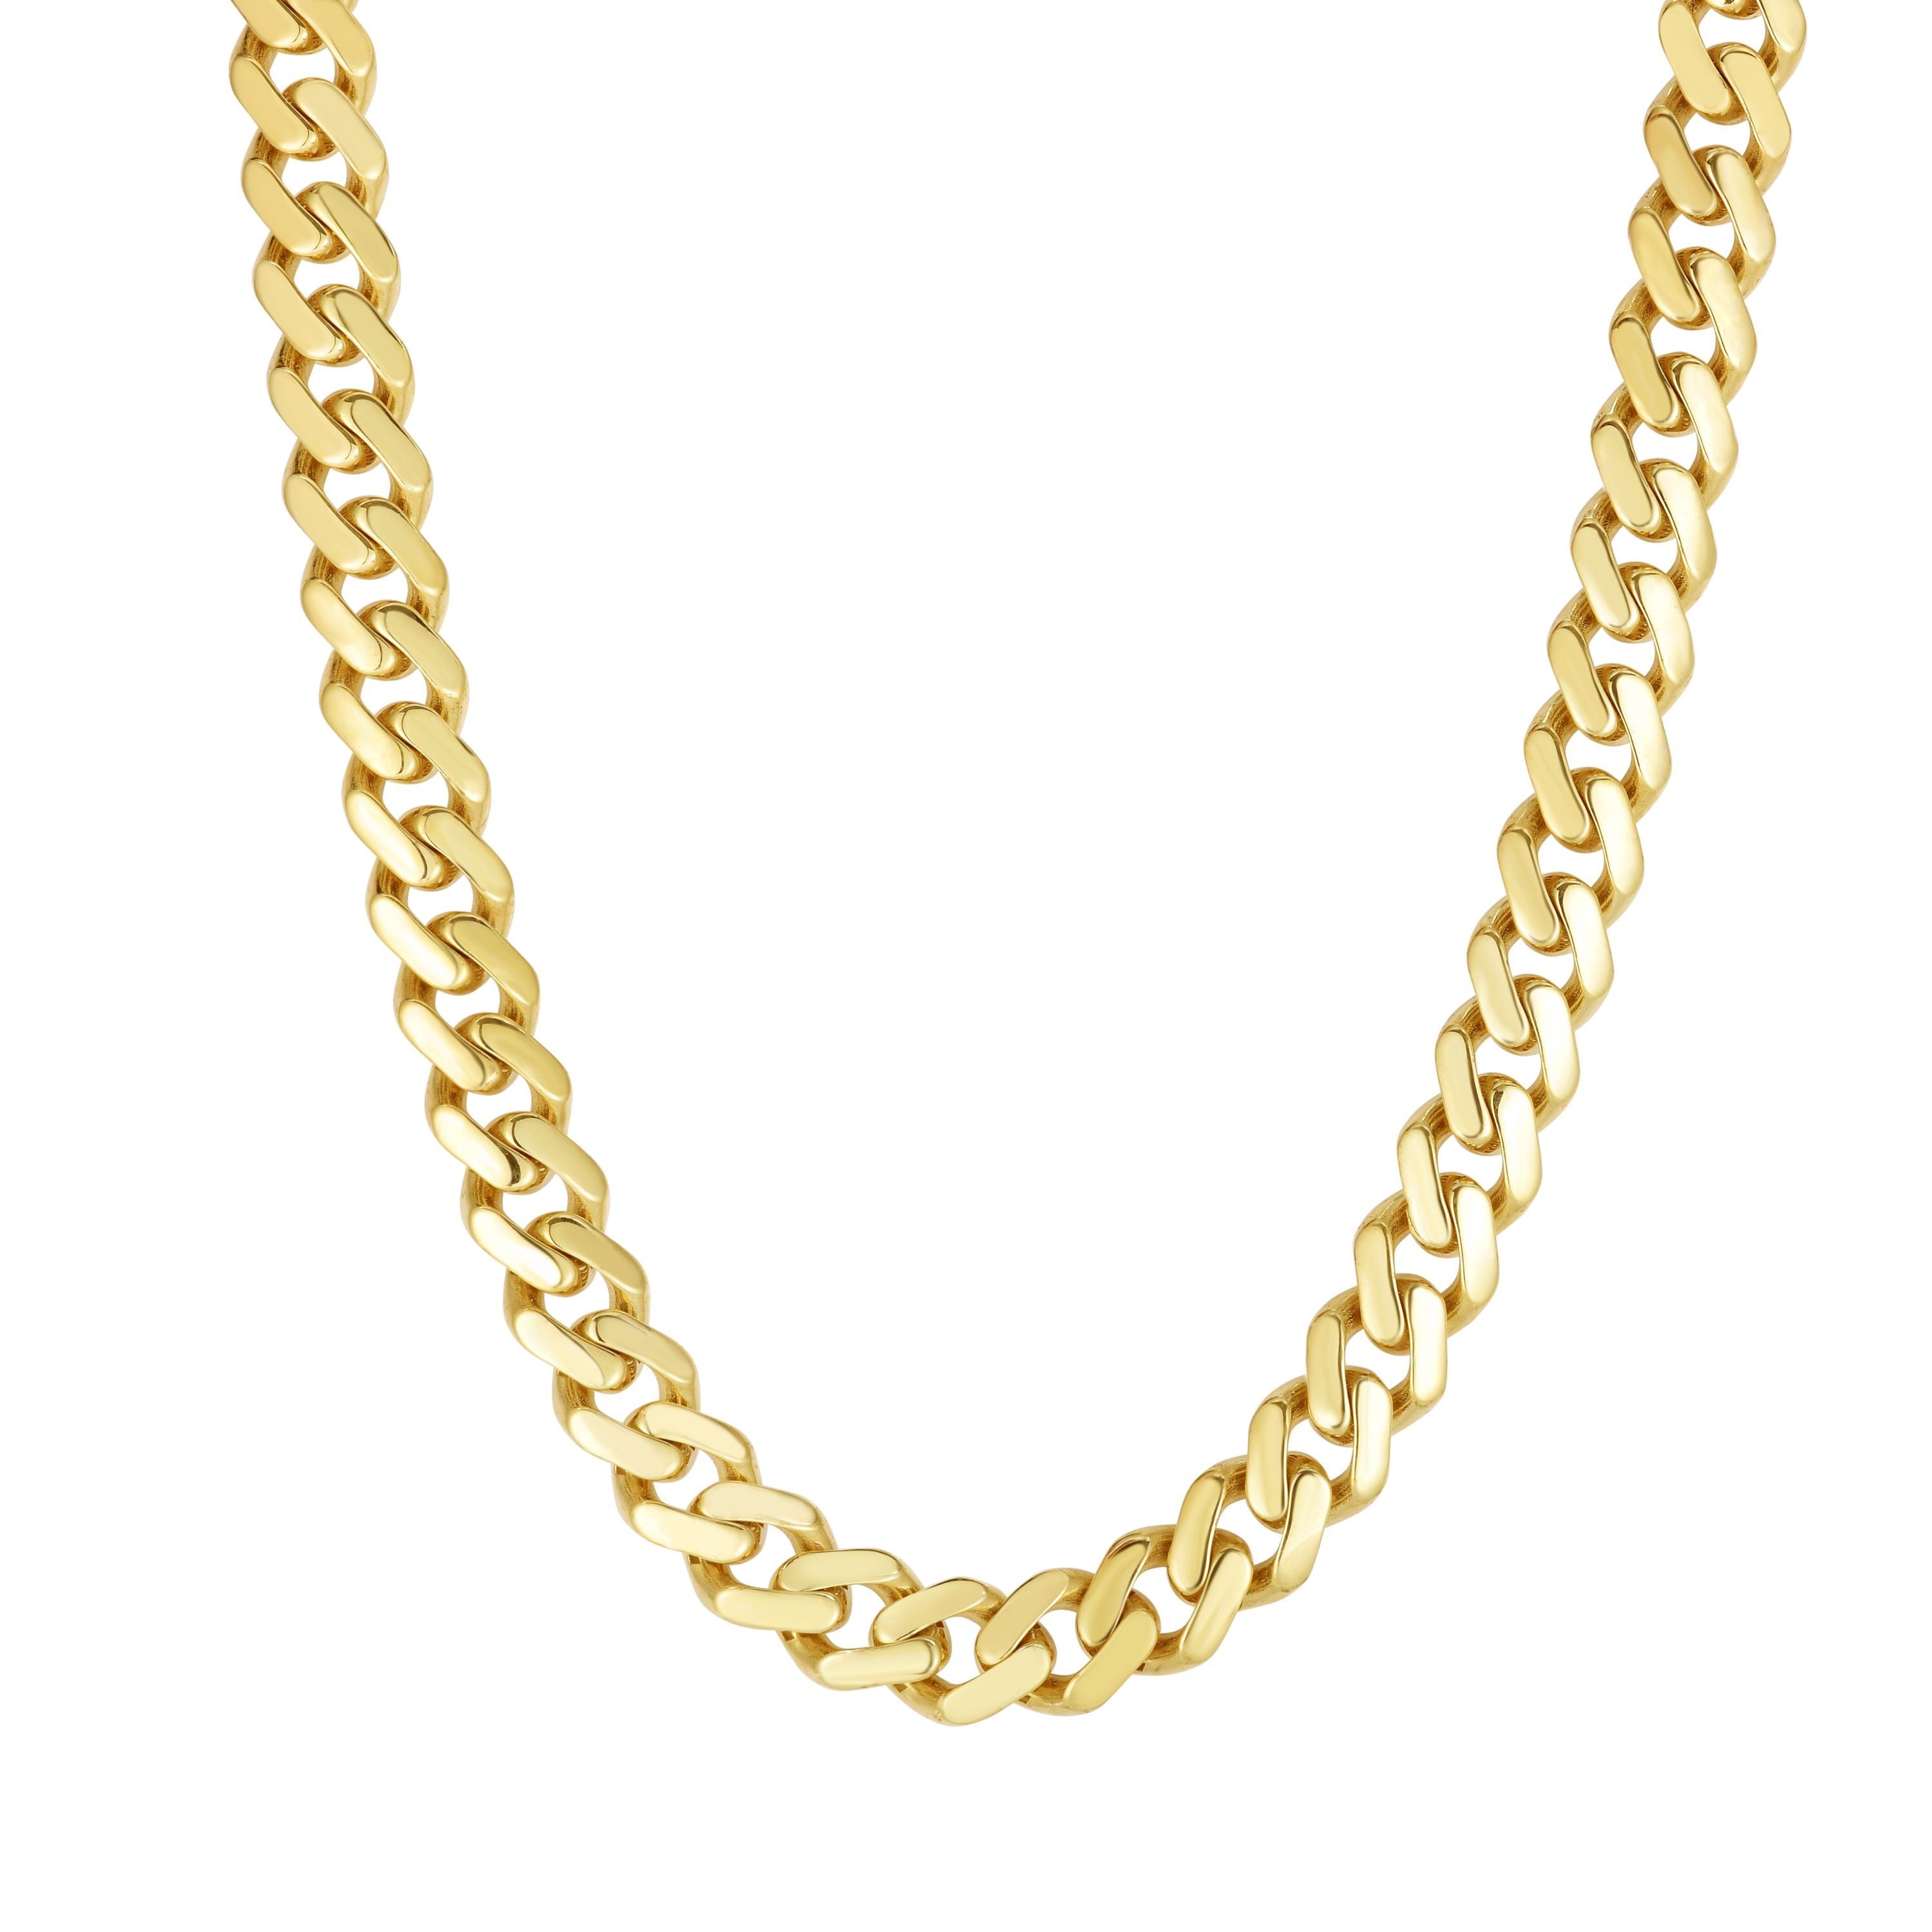 14k Yellow Gold Miami Cuban Link Chain Necklace, Width 9.5mm, 22" fine designer jewelry for men and women